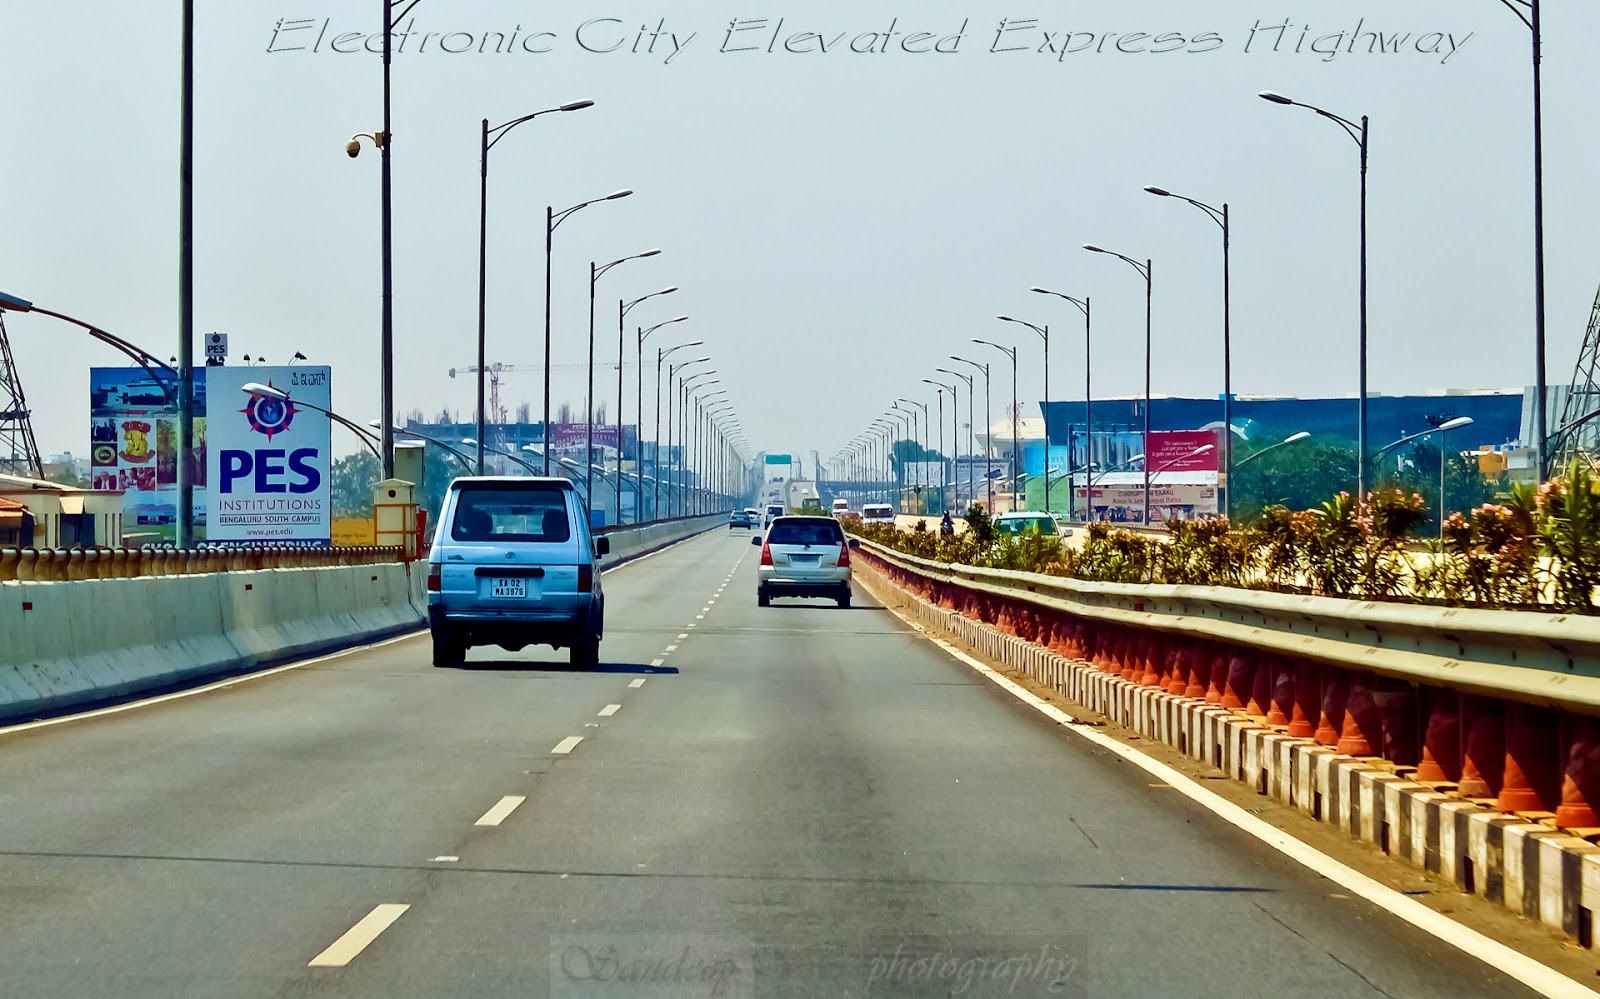 Electronics city Elevated express highway